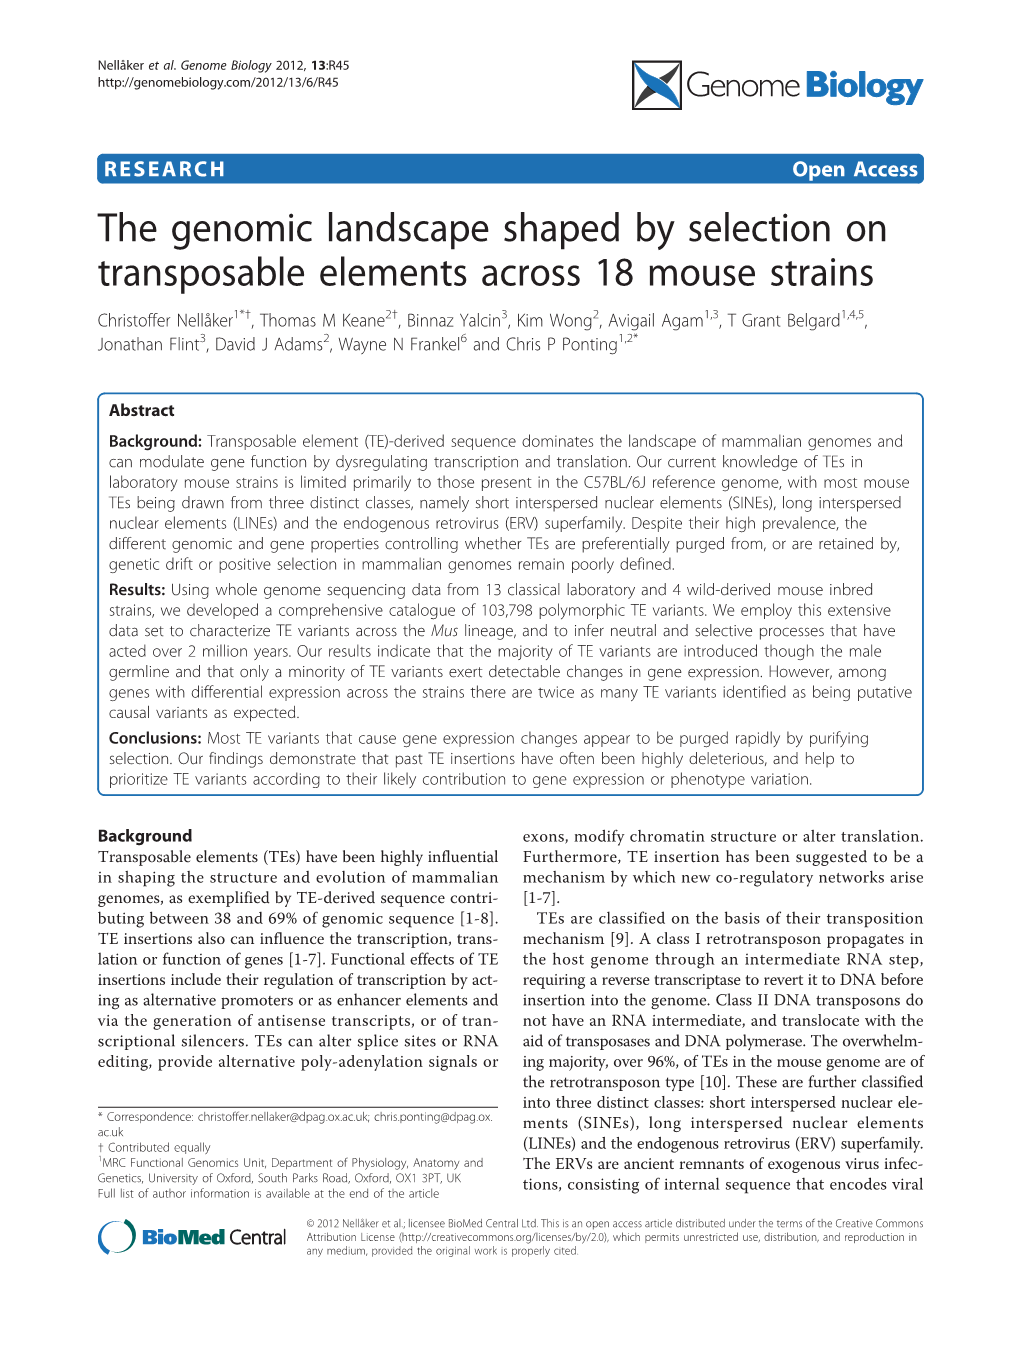 The Genomic Landscape Shaped by Selection on Transposable Elements